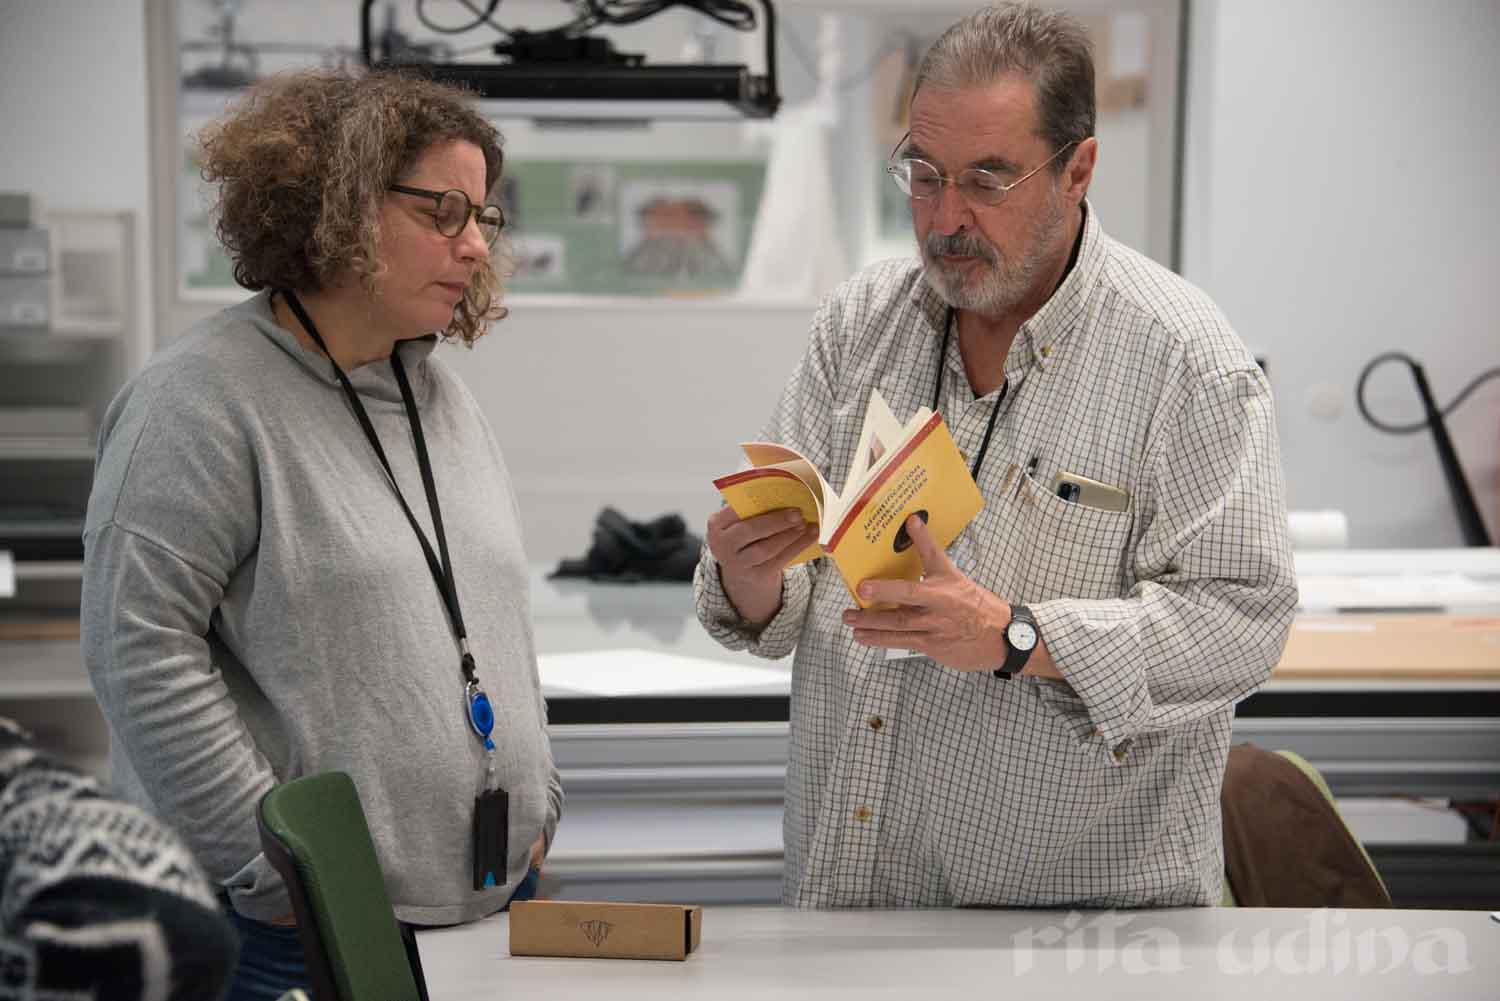 Kathrin Guthmann, paper conservator (National Museum, Oslo) and Jordi Mestre, photograph conservator (Girona, Spain). Course "Identification, preservation and conservation of photographs".